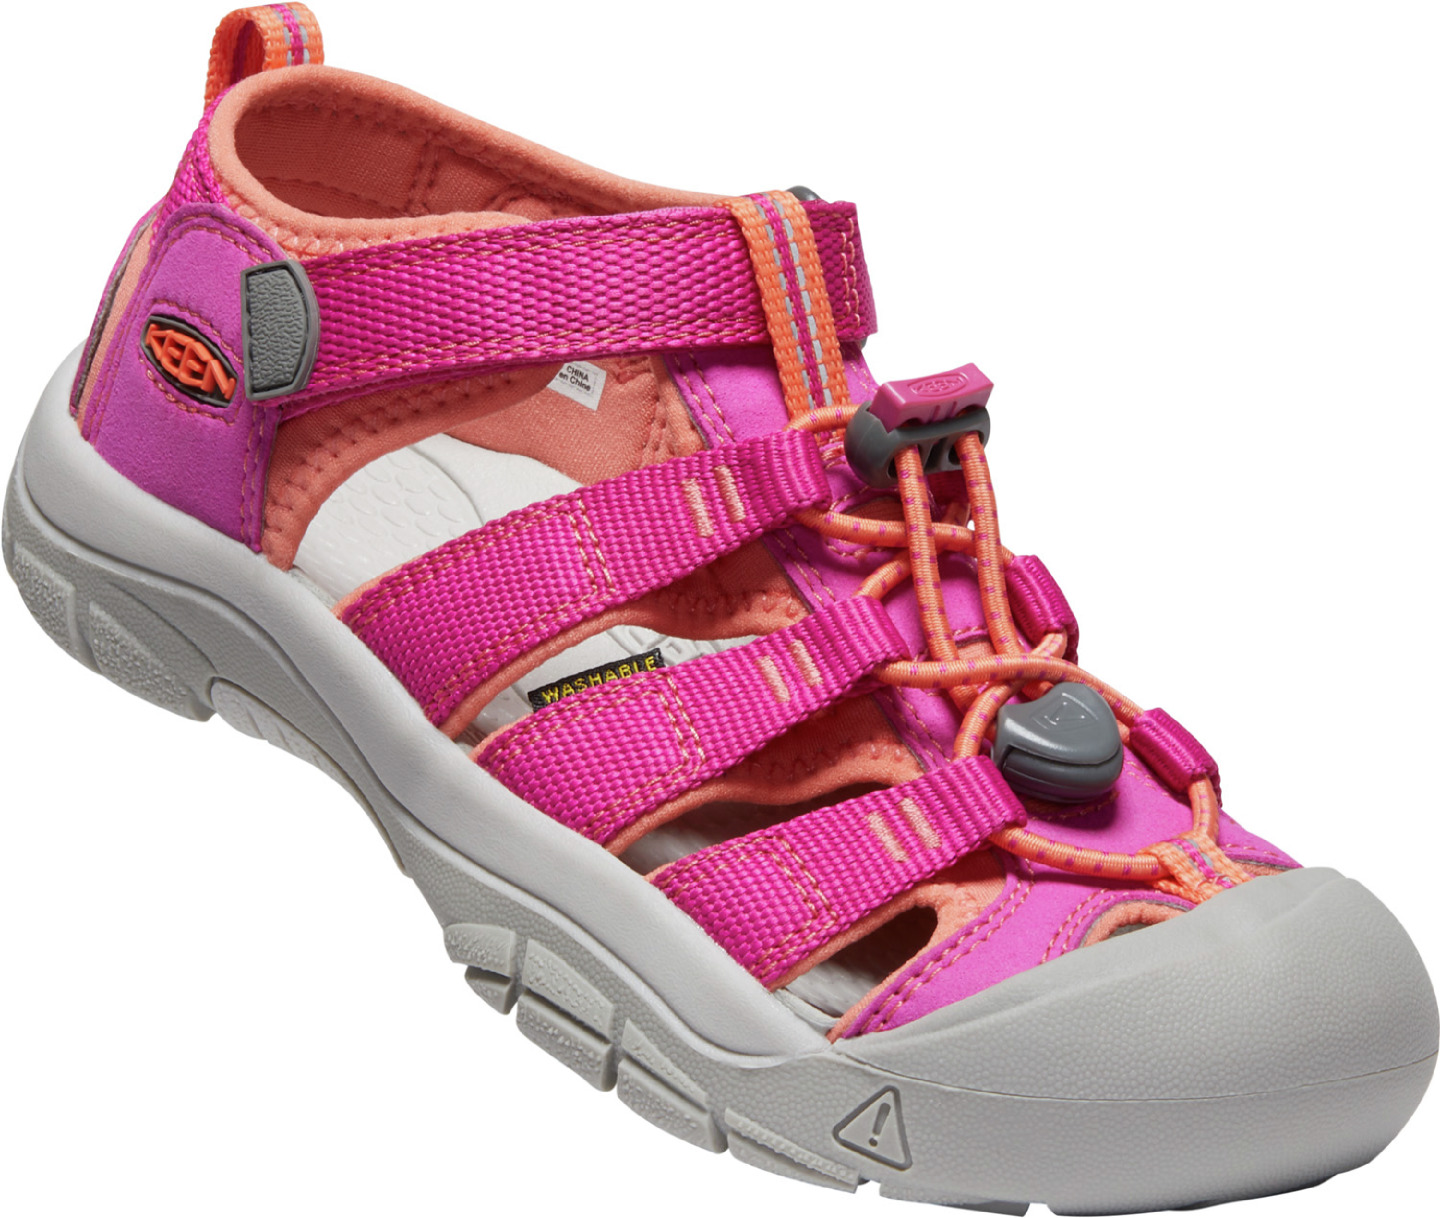 Keen dětské sandály Newport H2 Youth Very Berry/Fusion Coral Barva: very berry/fusion coral, Velikost: 4 UK (37 EU / 23,5 cm)